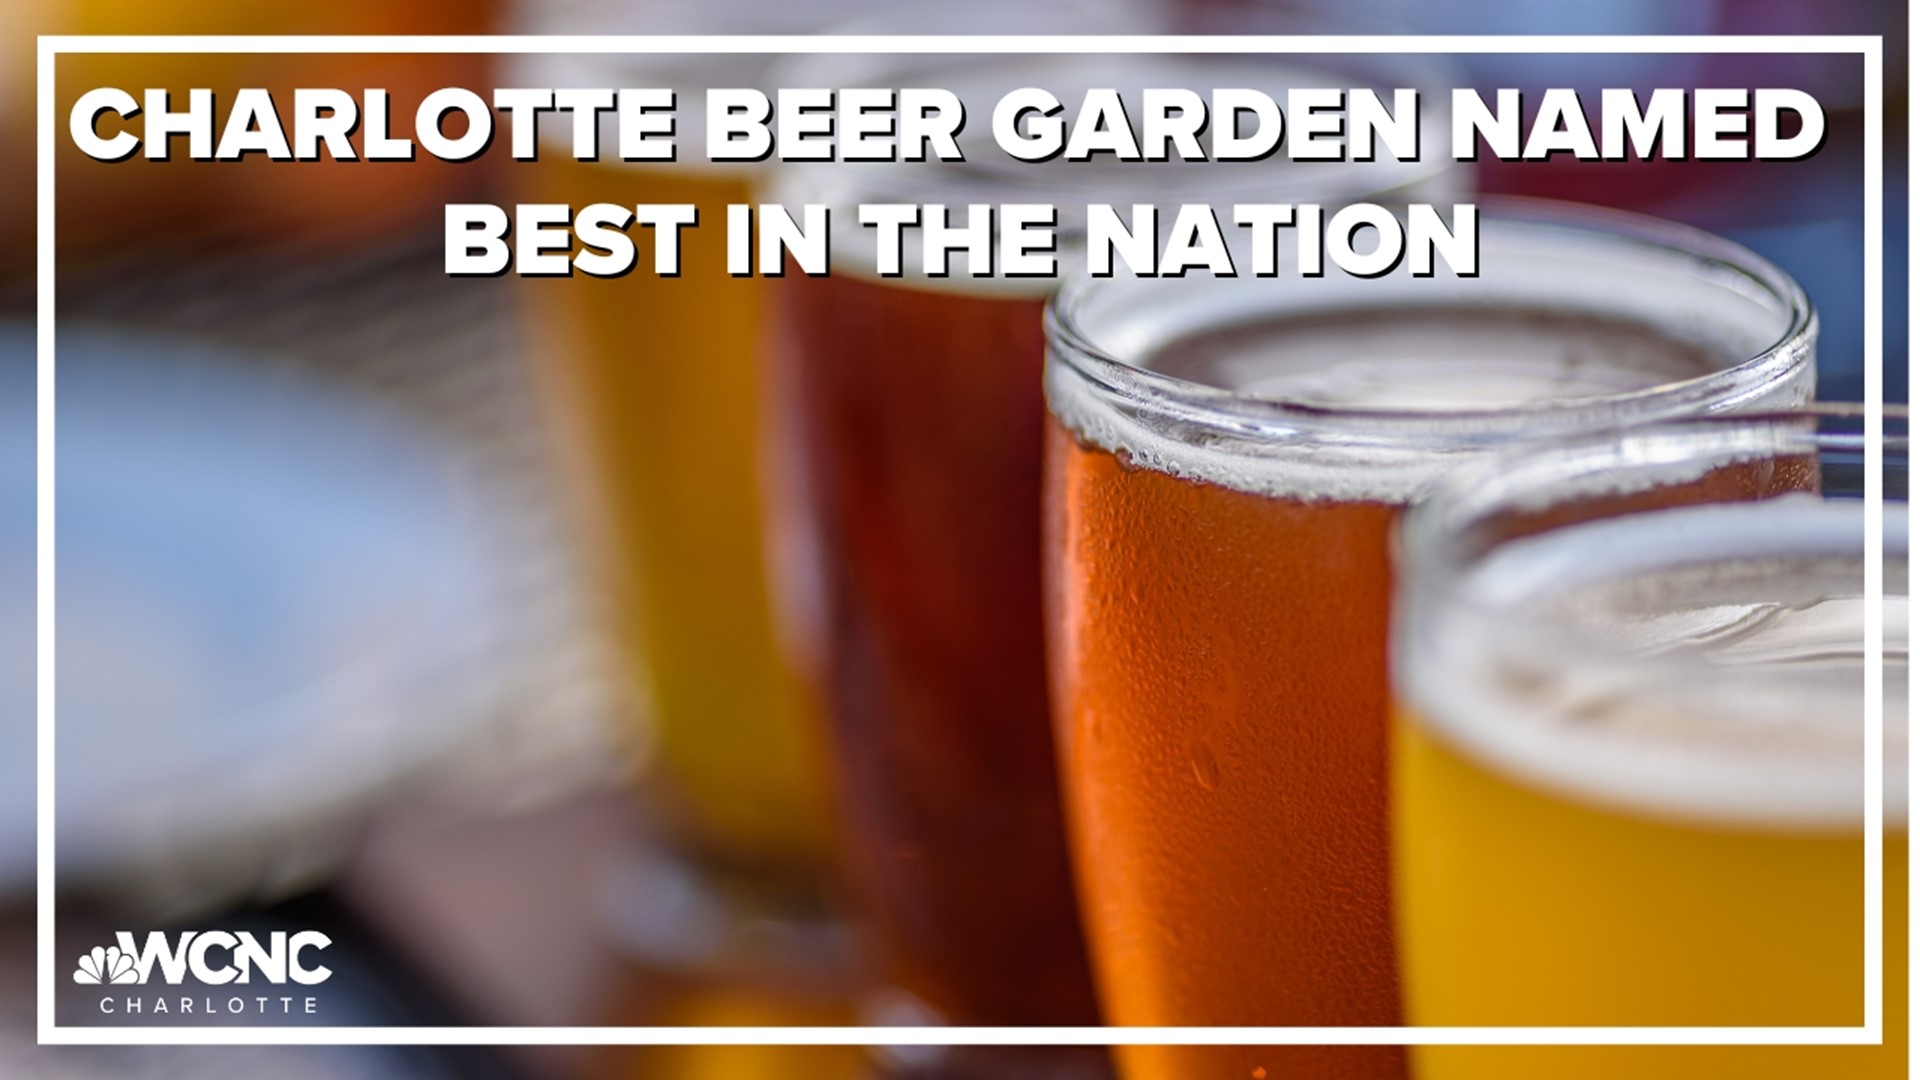 Charlotte Beer Garden recognized as top in the nation